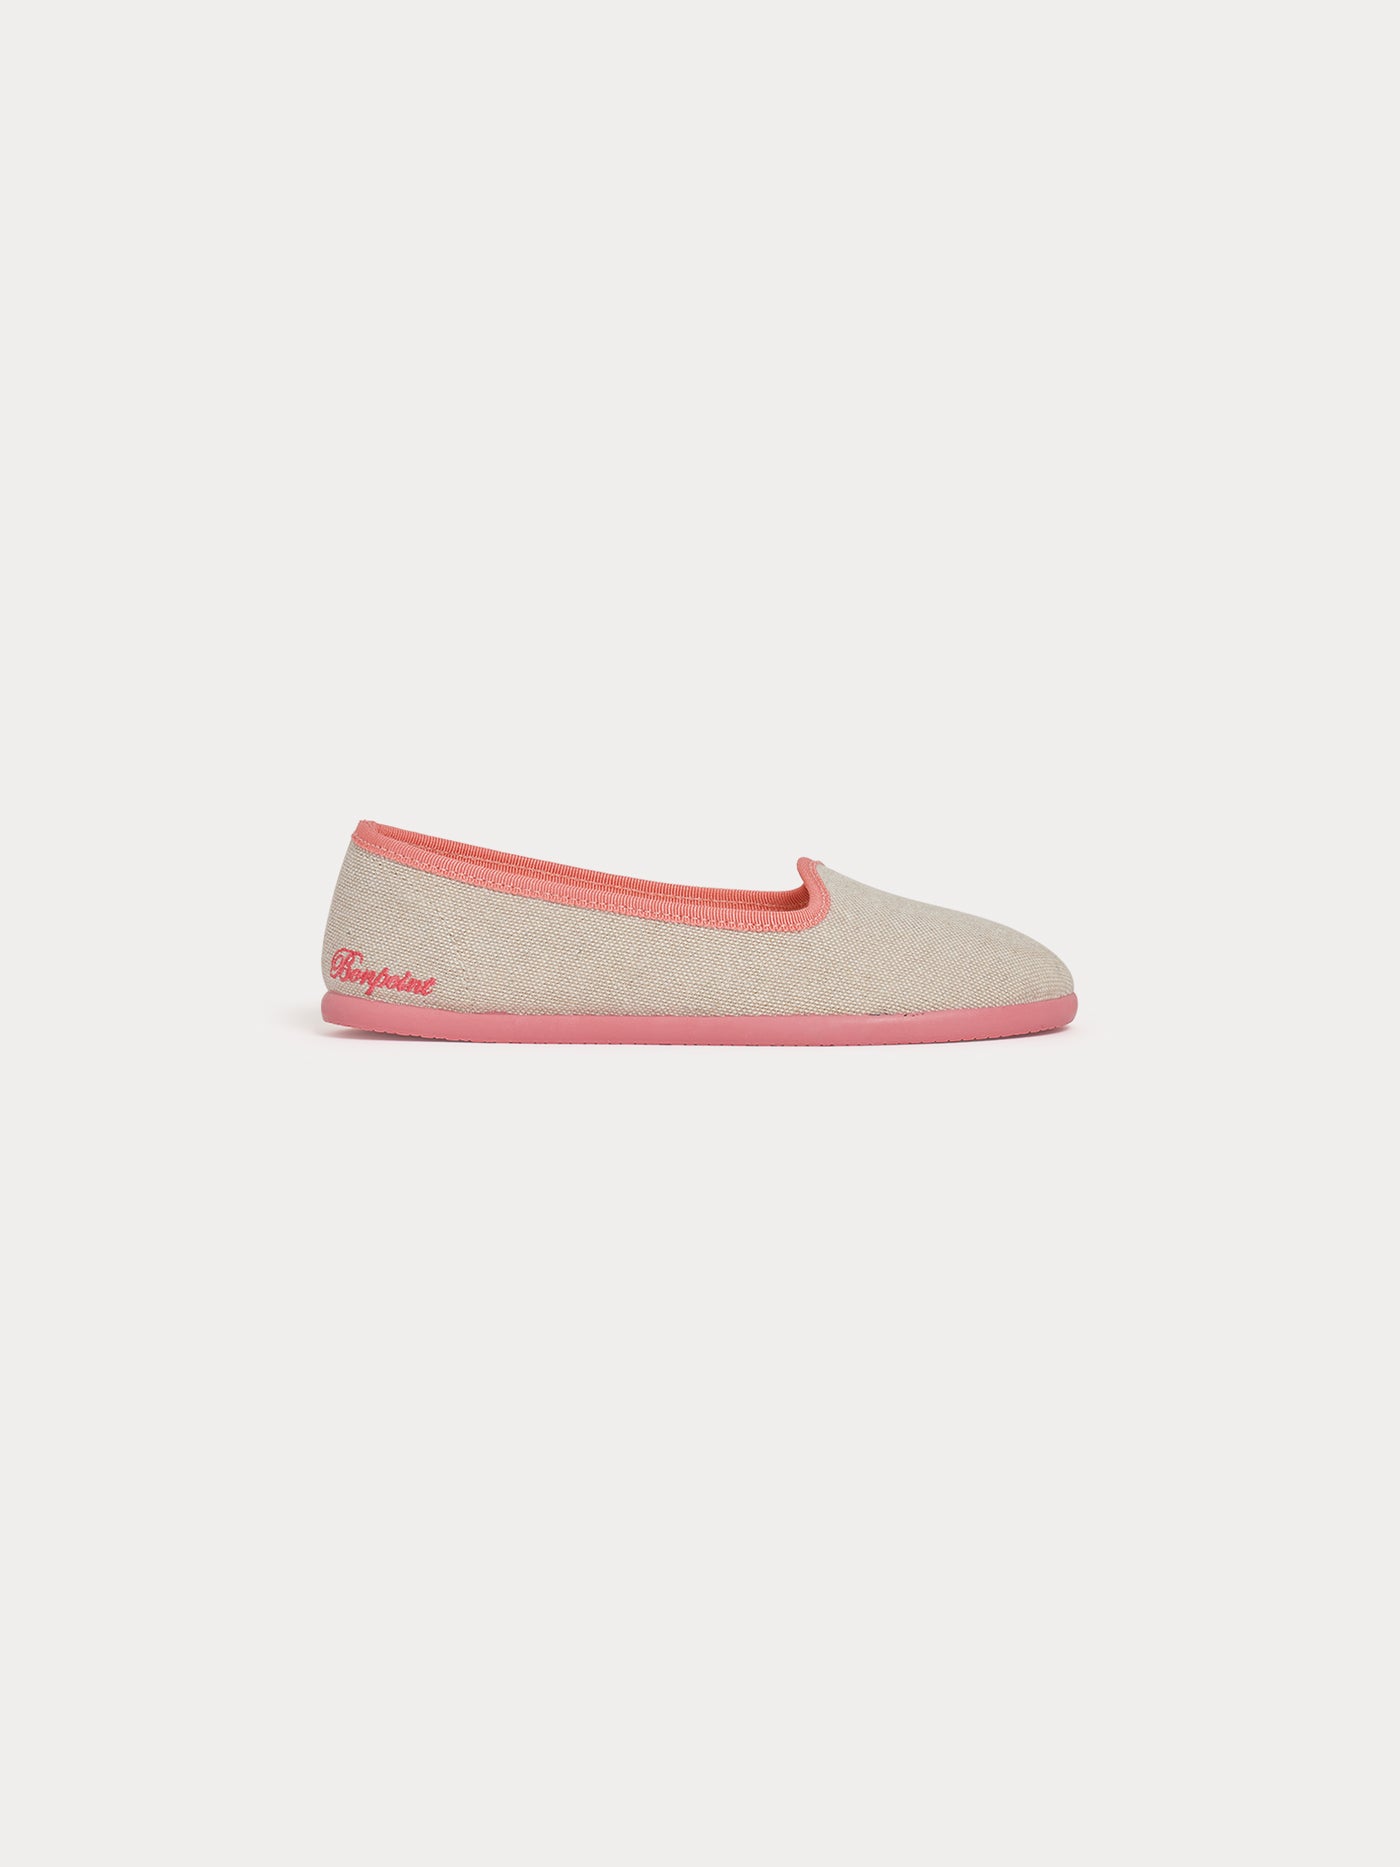 Tenise Slippers camellia pink